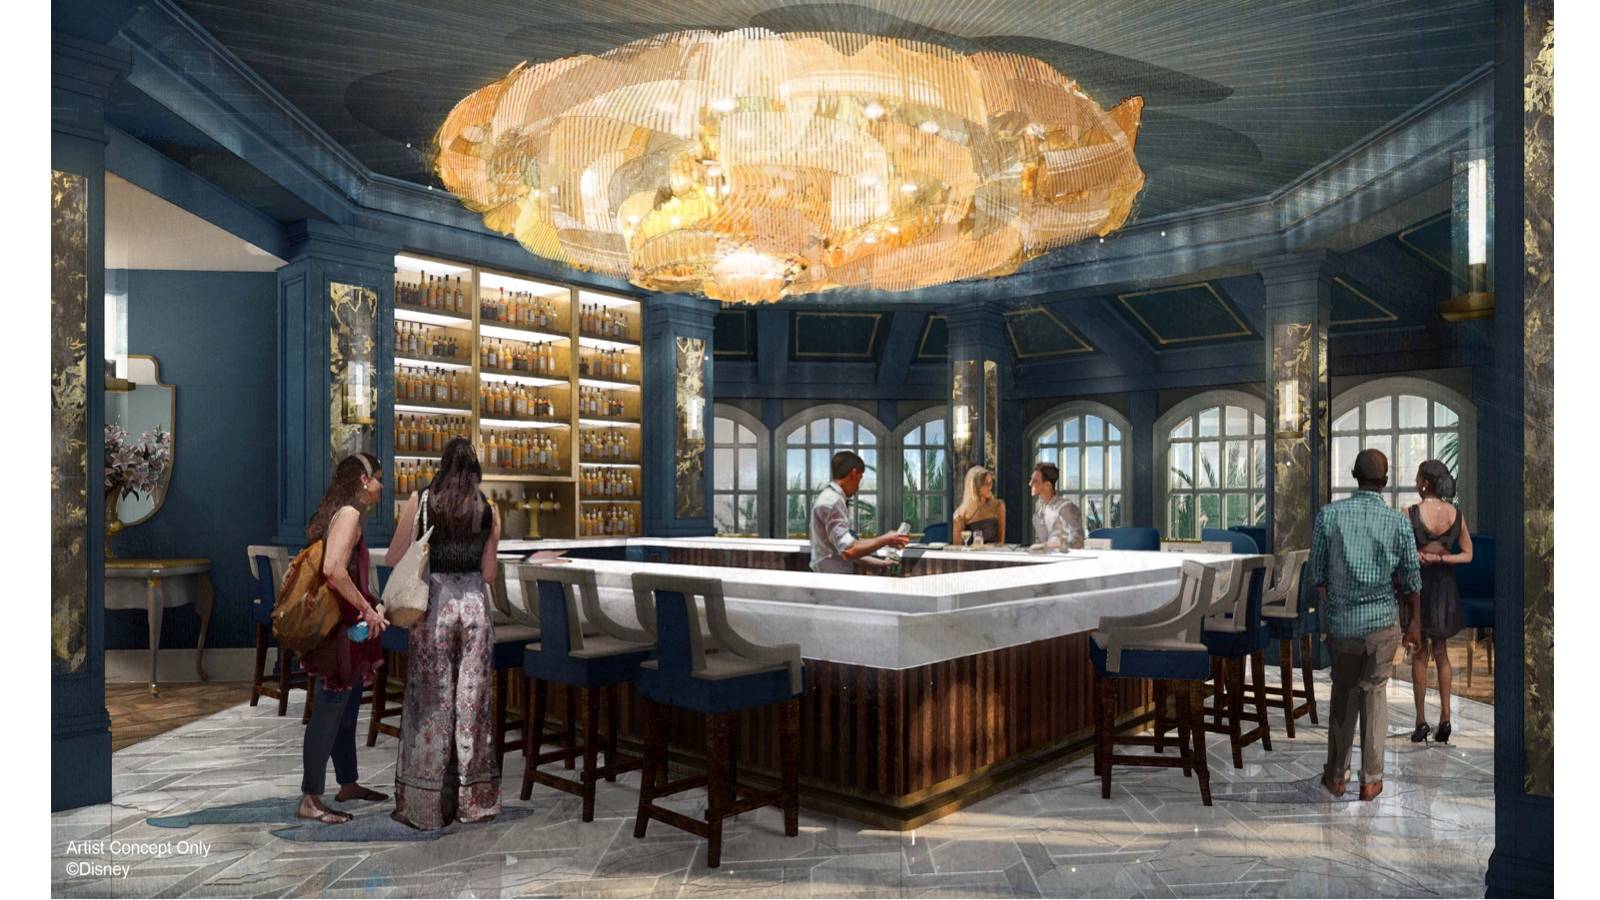 Menu with pricing now available for the new Enchanted Rose Lounge at Disney's Grand Floridian Resort